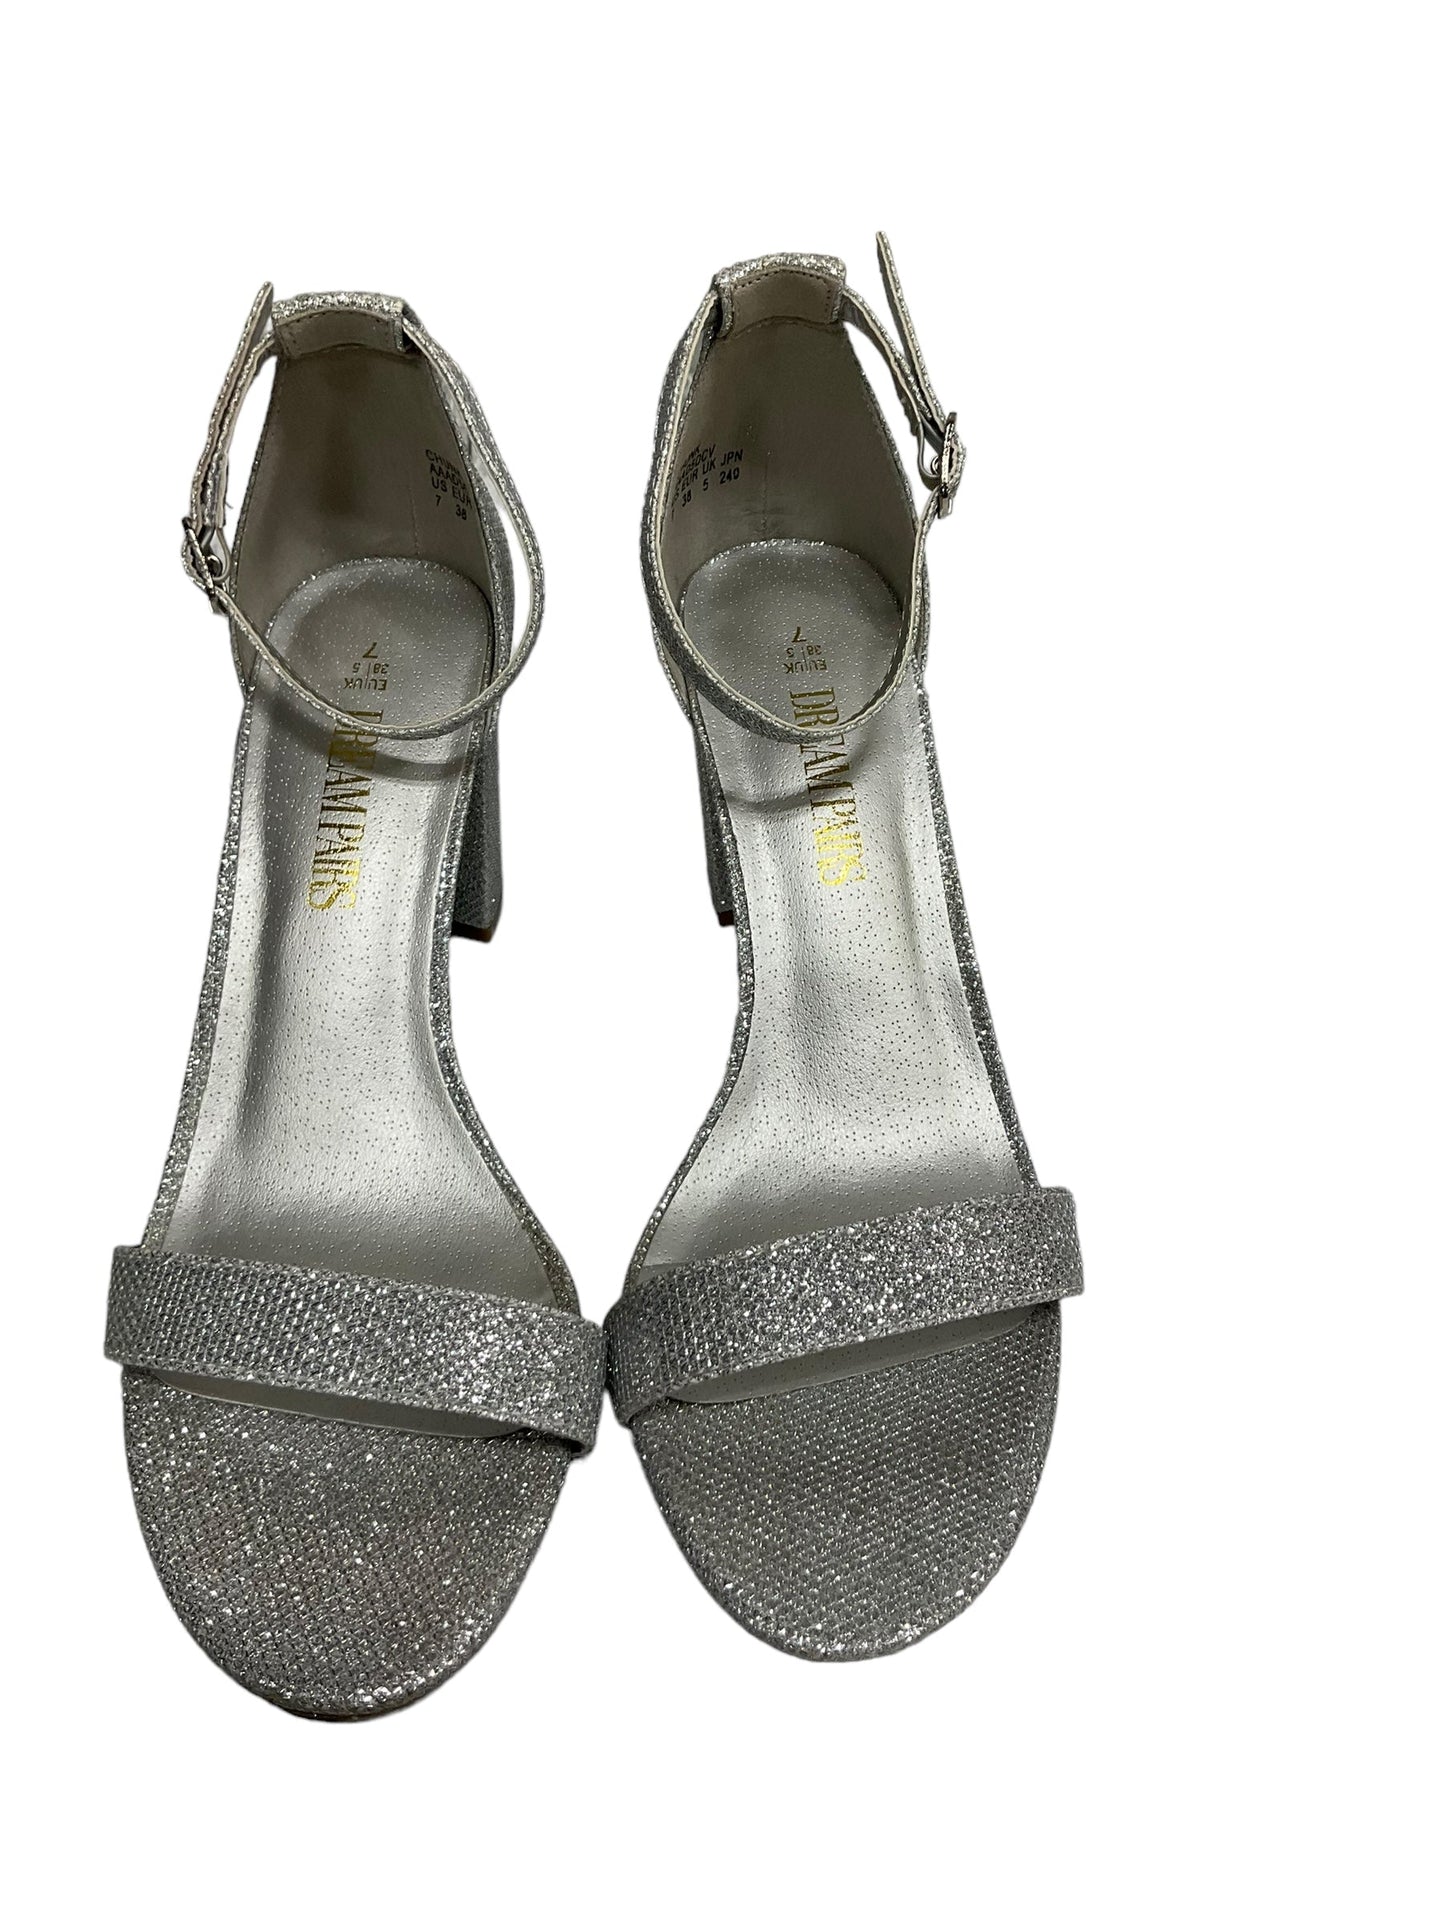 Silver Shoes Heels Block Clothes Mentor, Size 7